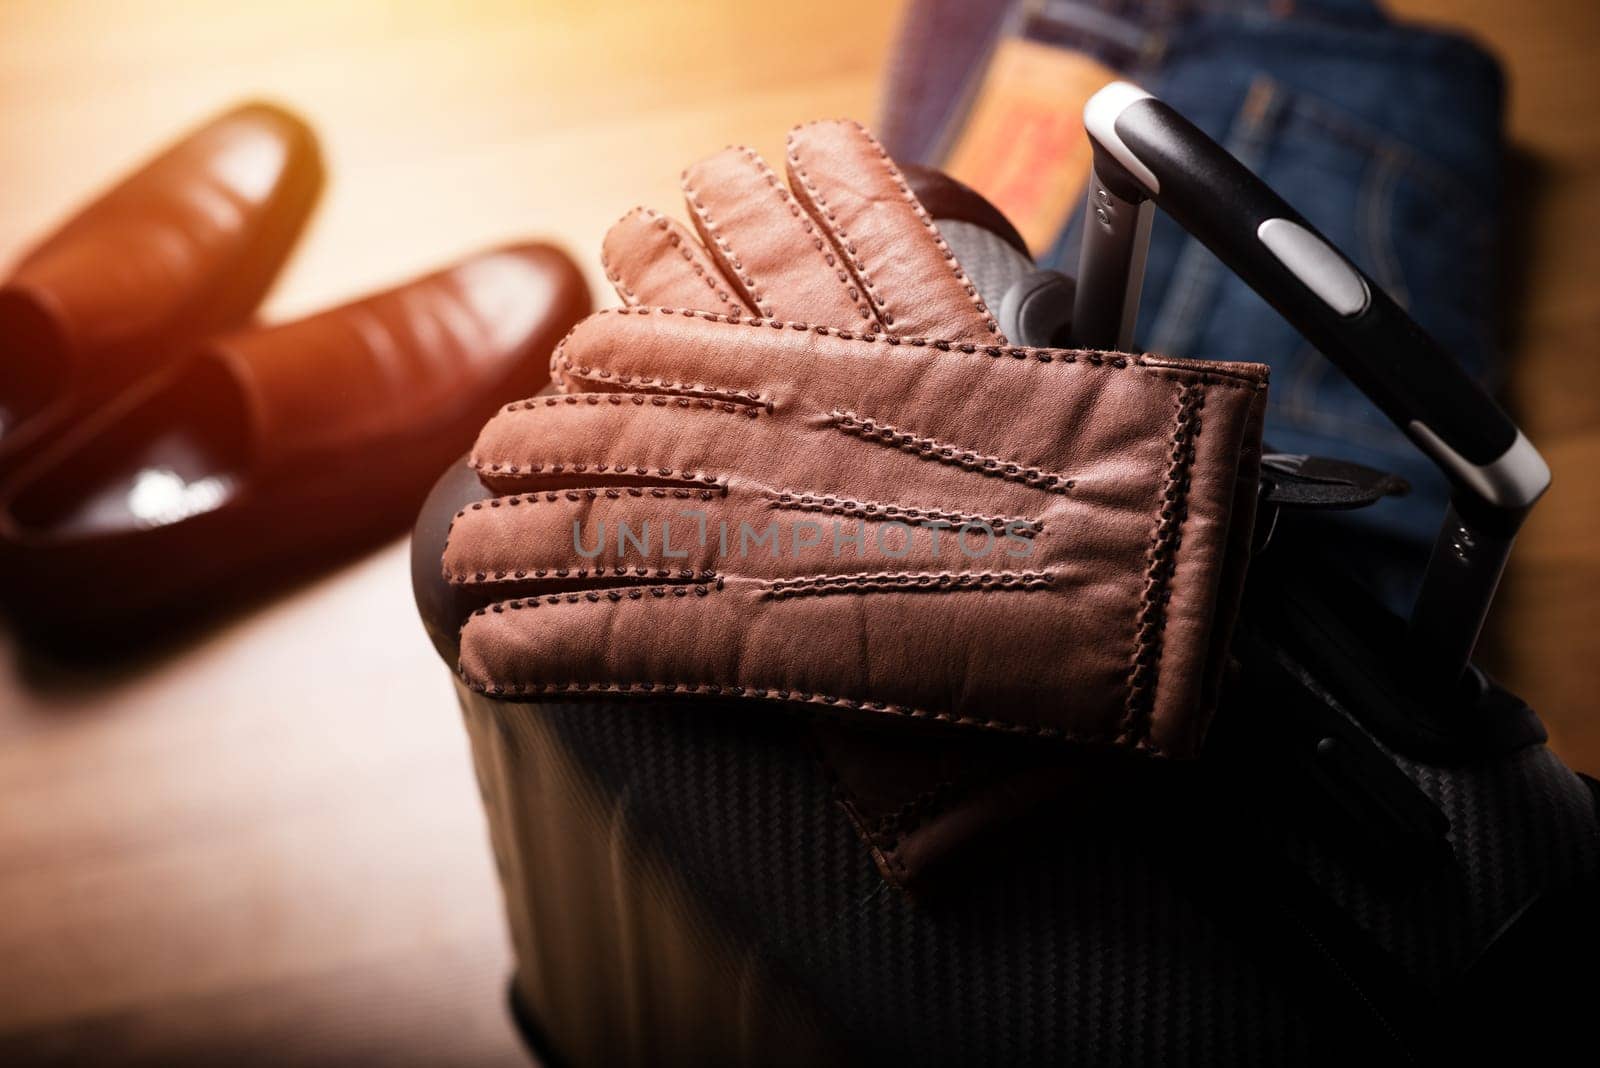 Pair of men's brown leather gloves and other men's accessories on the luggage.